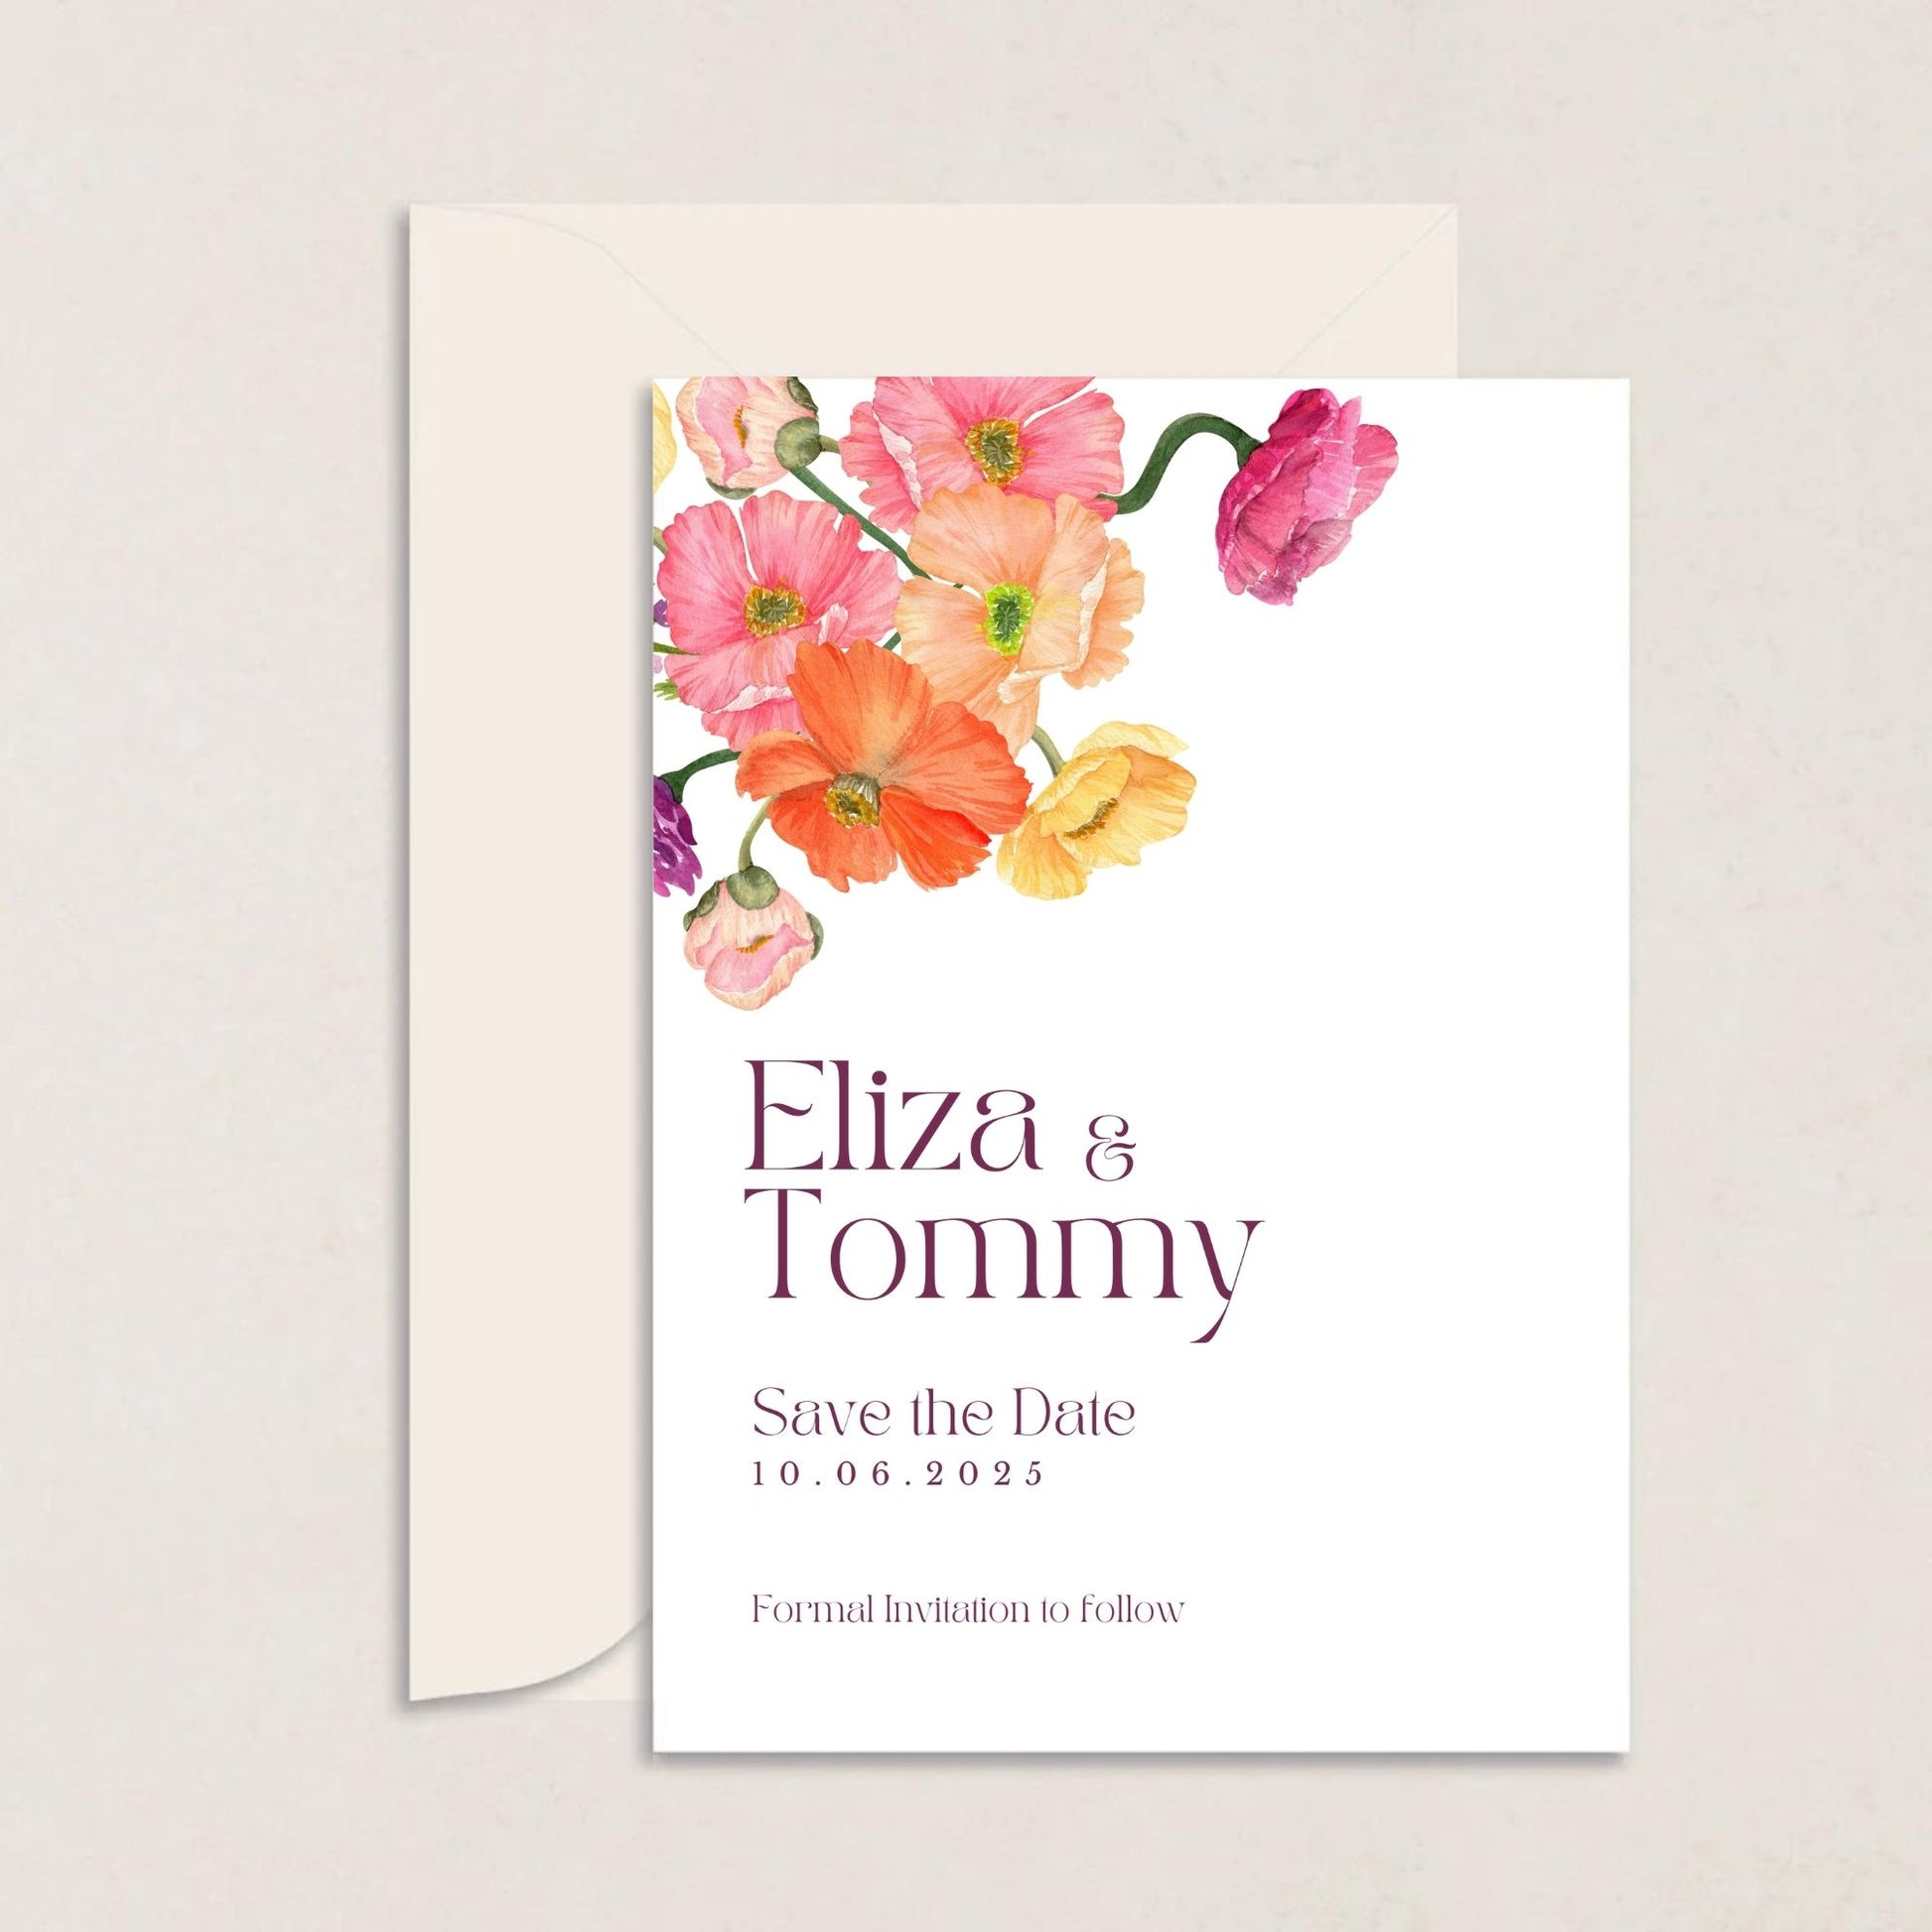 ELIZA Wildflower Wedding Save the Date - Wedding Invitations available at The Ivy Collection | Luxury Wedding Stationery